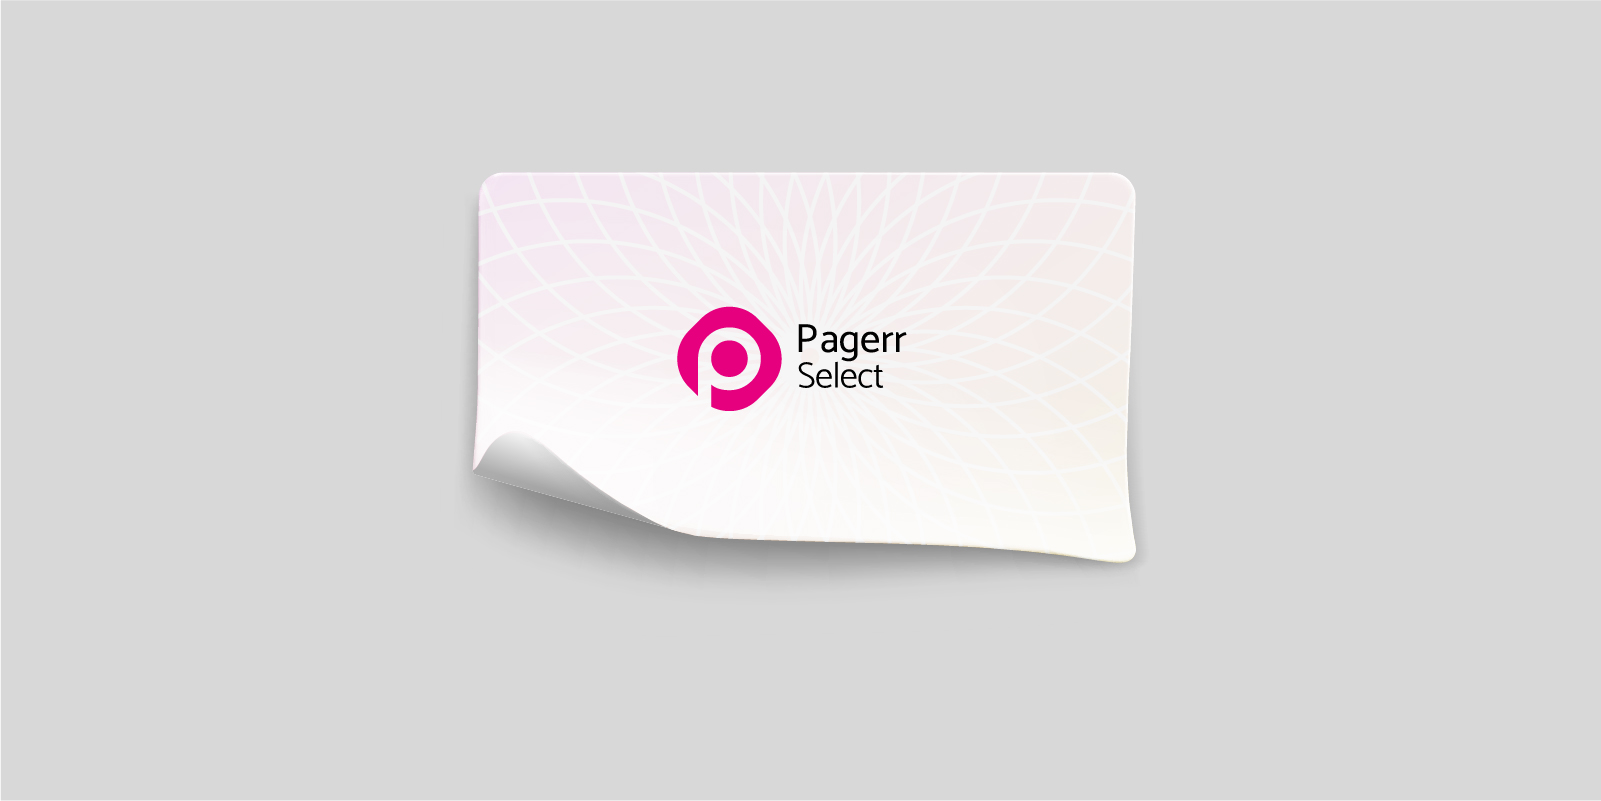 Sheet stickers in Perth - Print with Pagerr